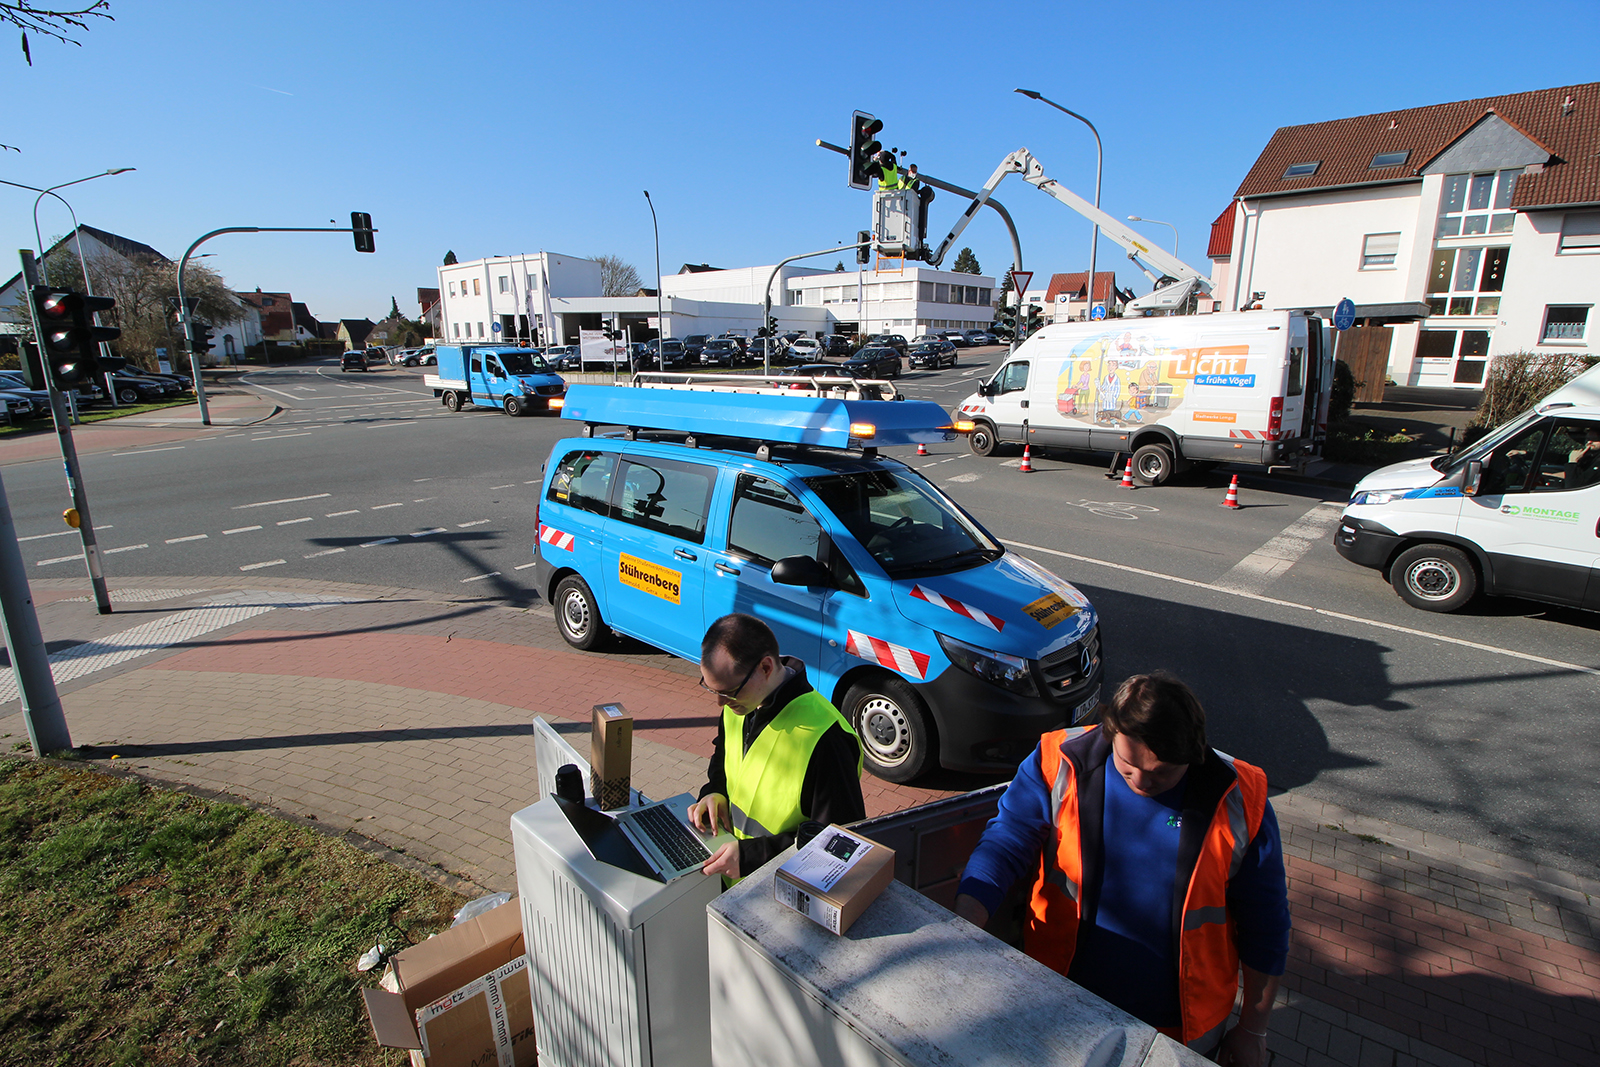 The “KI4LSA” project aims to provide smart, predictive traffic light changing using artificial intelligence. Highresolution cameras and radar sensors gather detailed traffic information.